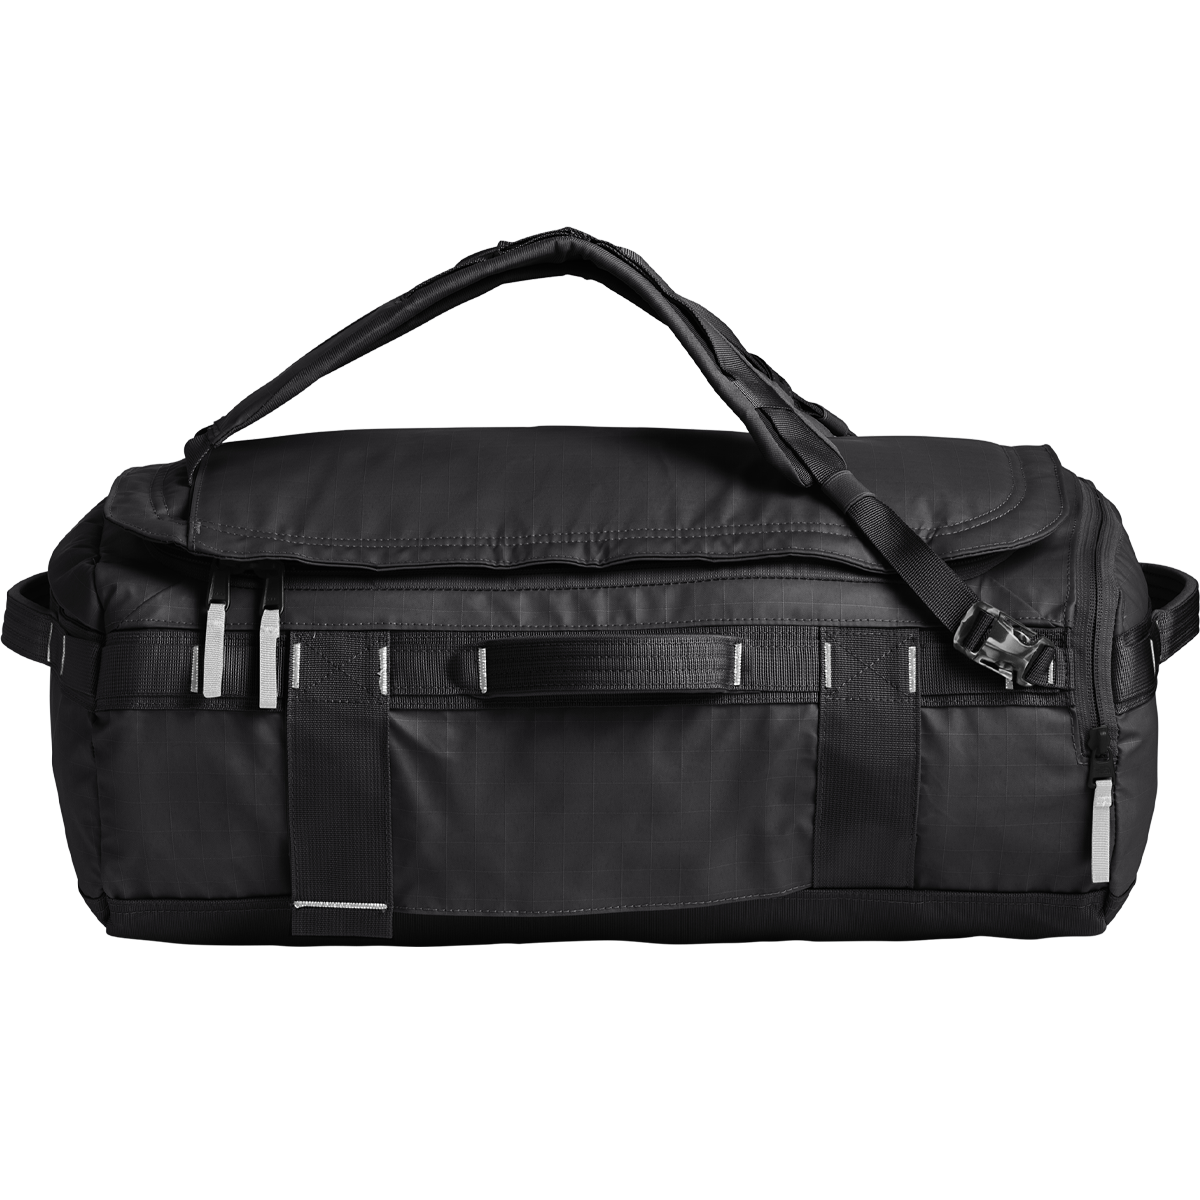 The North Face Base Camp Duffel Bag - Large - 96 Litre – 53